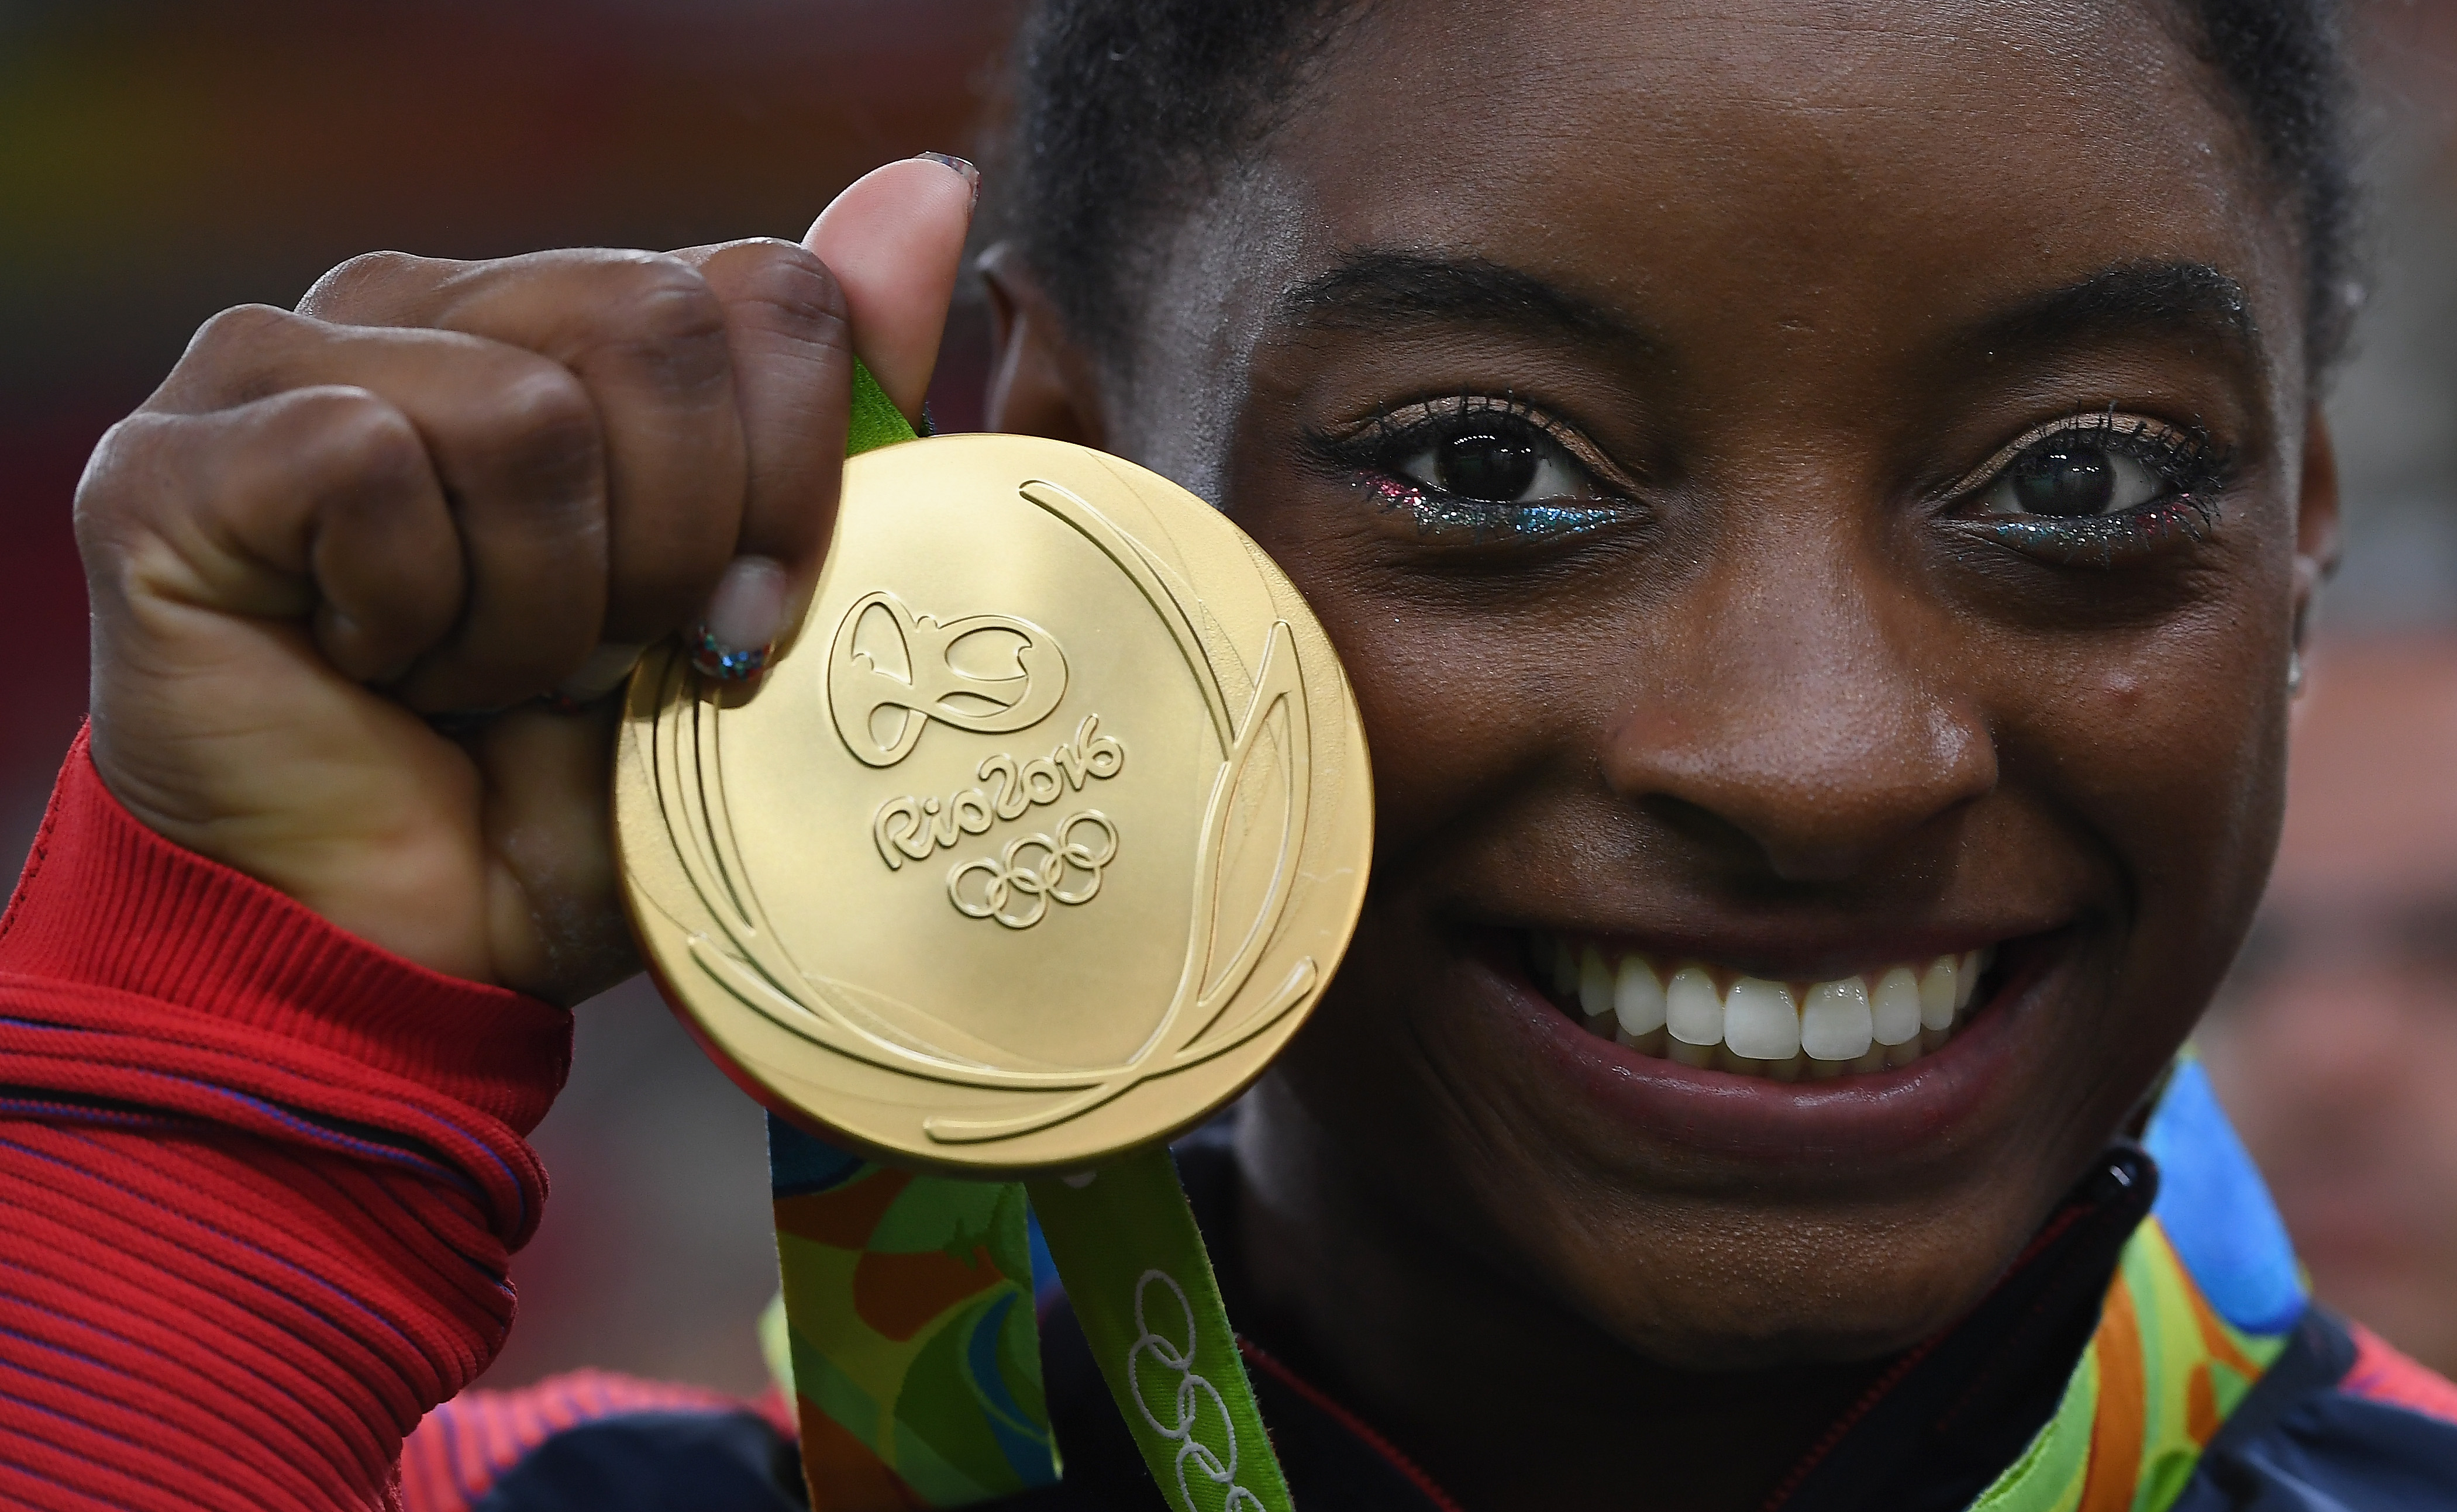 Rio 2016 | Simone Biles dazzles while Phelps wins his 22nd gold on day 6